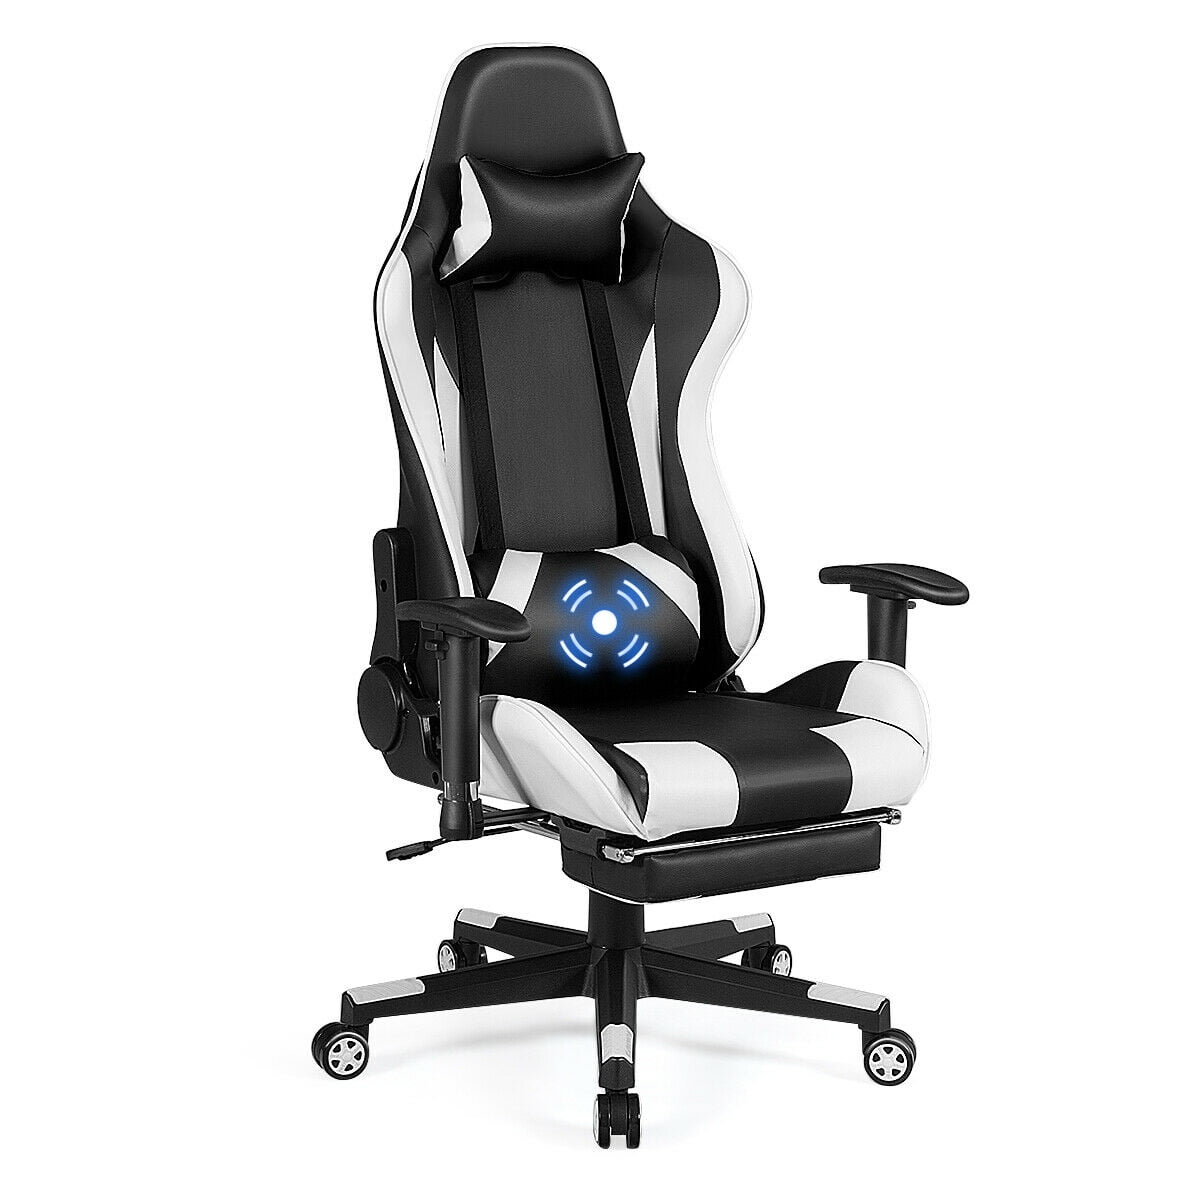 costway gaming chair high back racing recliner office chair wlumbar  support  footrest  walmart